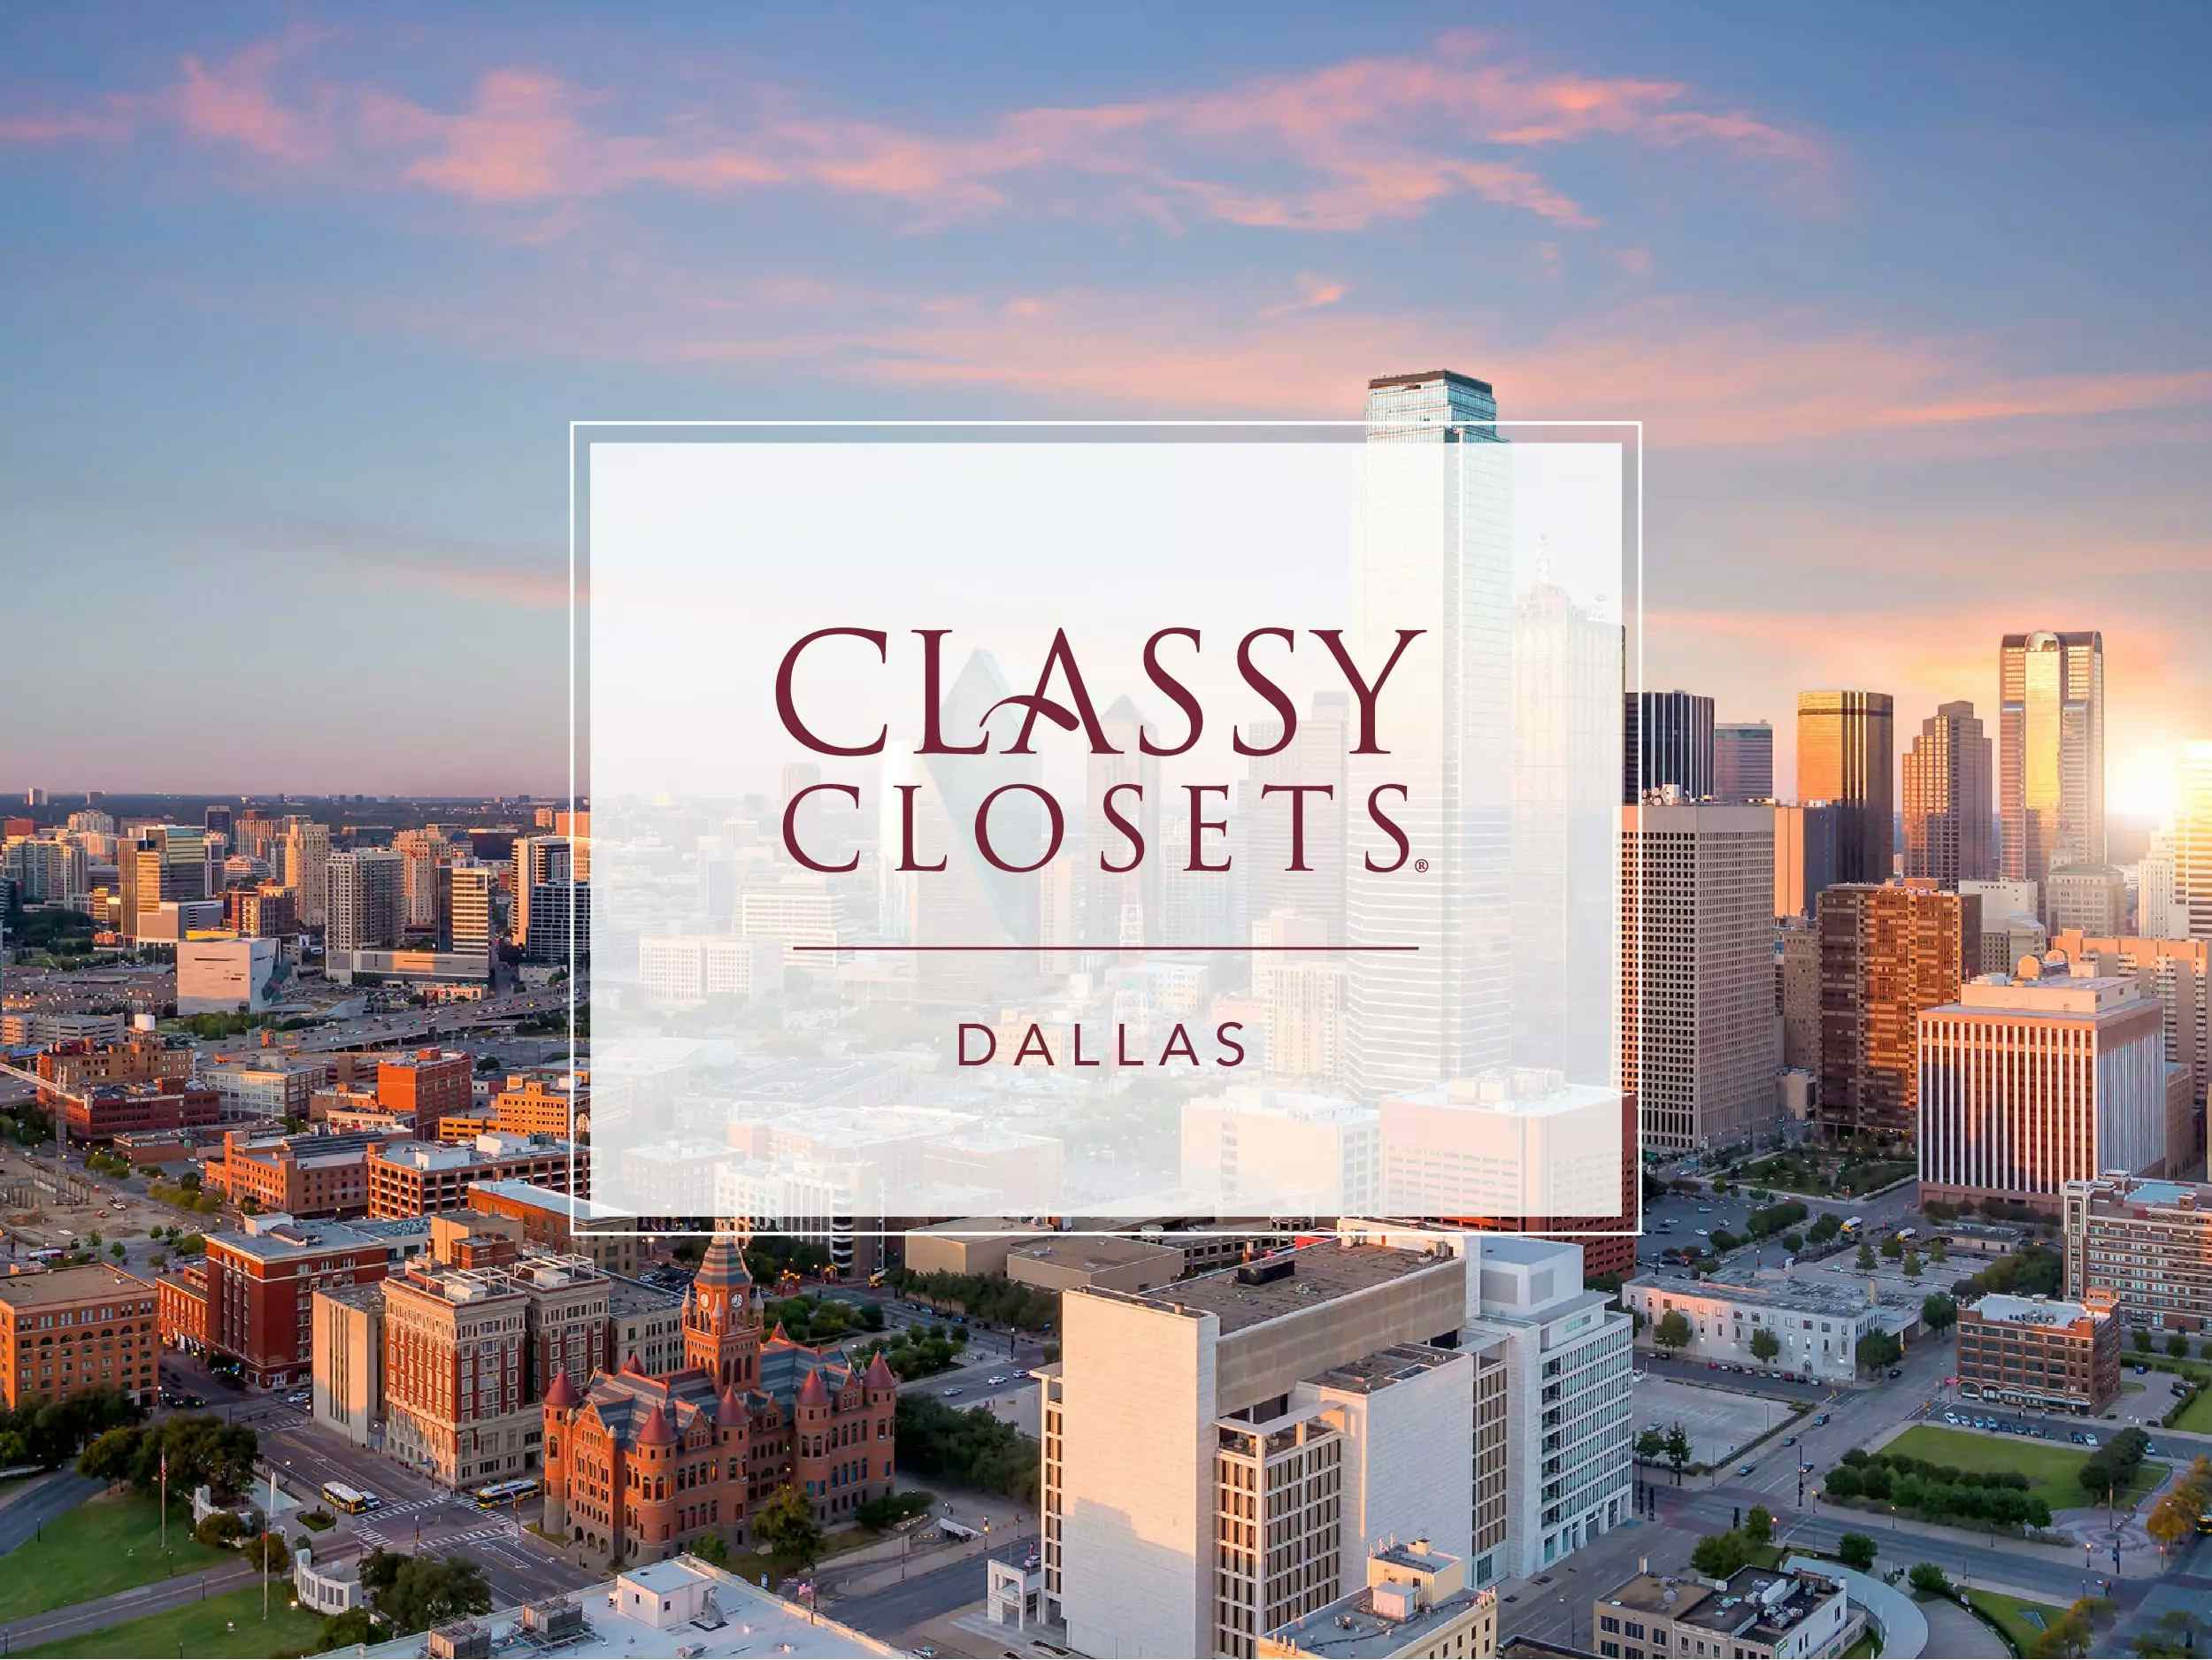 showroom on the location page-/images/locations/Dallas.webp